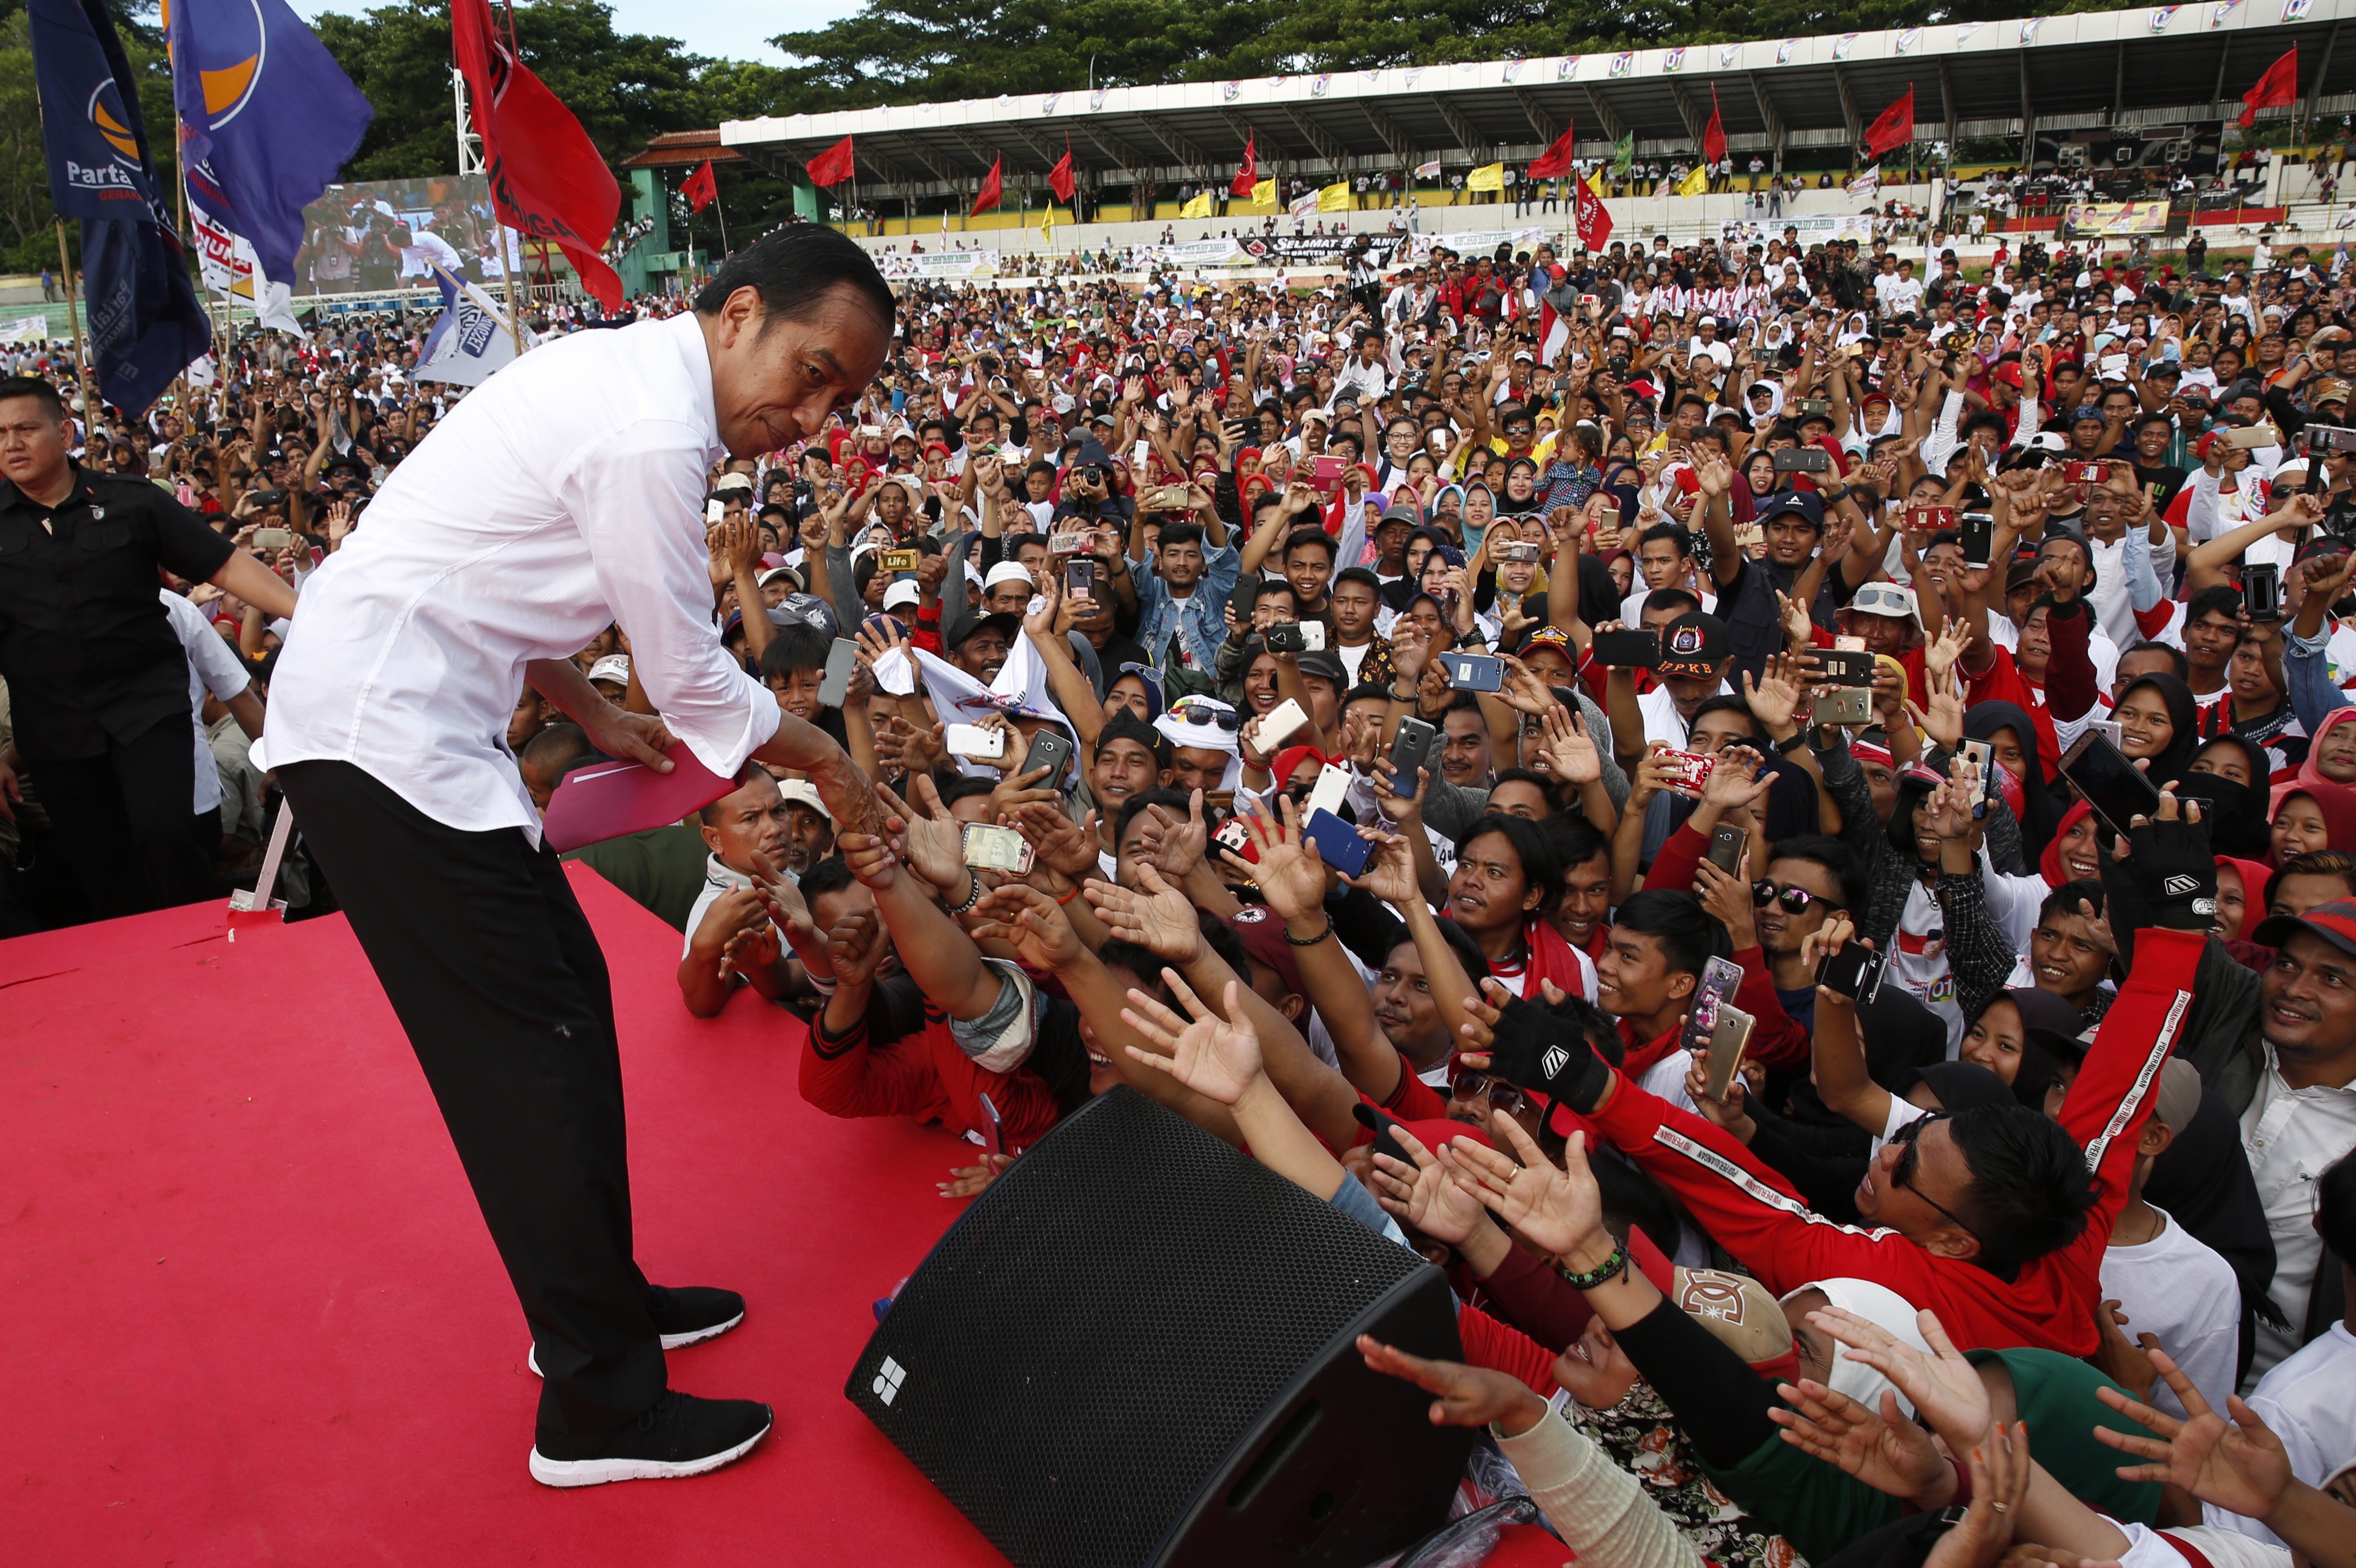 President Joko Widodo meeting supporters at a campaign rally. Photo: EPA-EFE